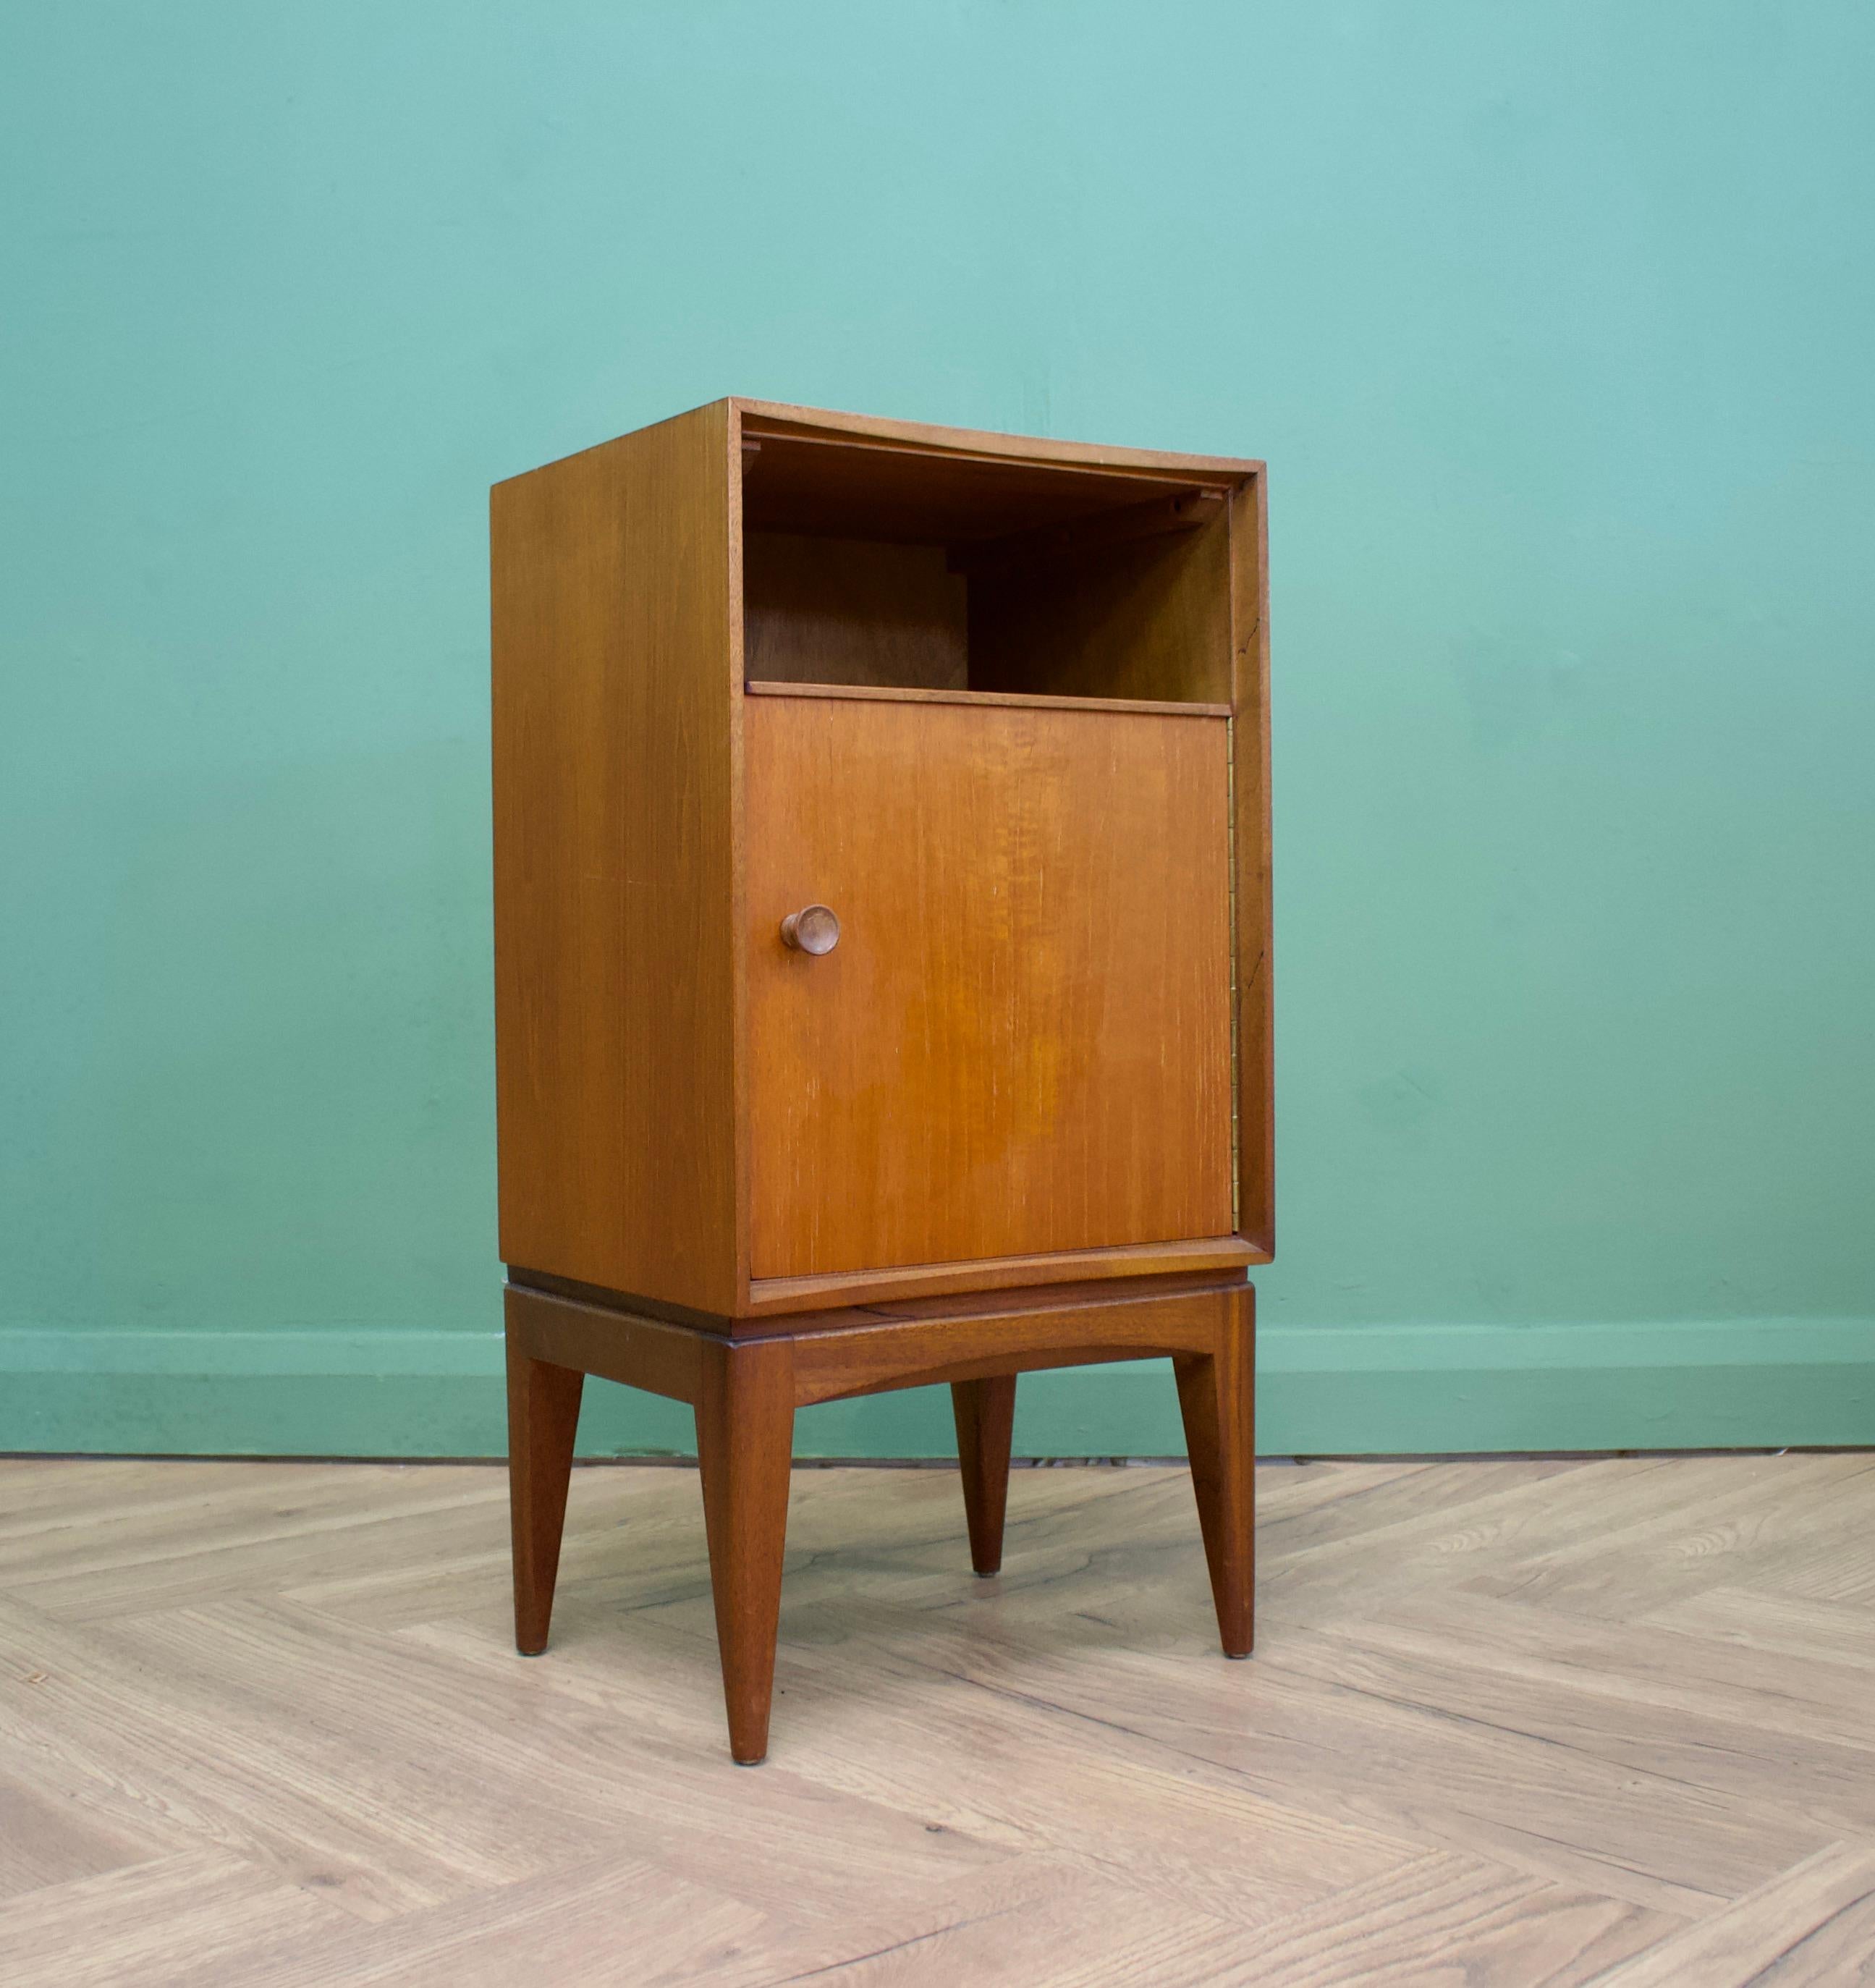 A teak  bedside table from Loughborough Furniture - retailed through Heals during the 1950s - designed by Neville Ward and Frank Austin
There are unusual brass inlay details to the bottom
This piece can be used as a lamp or side table also